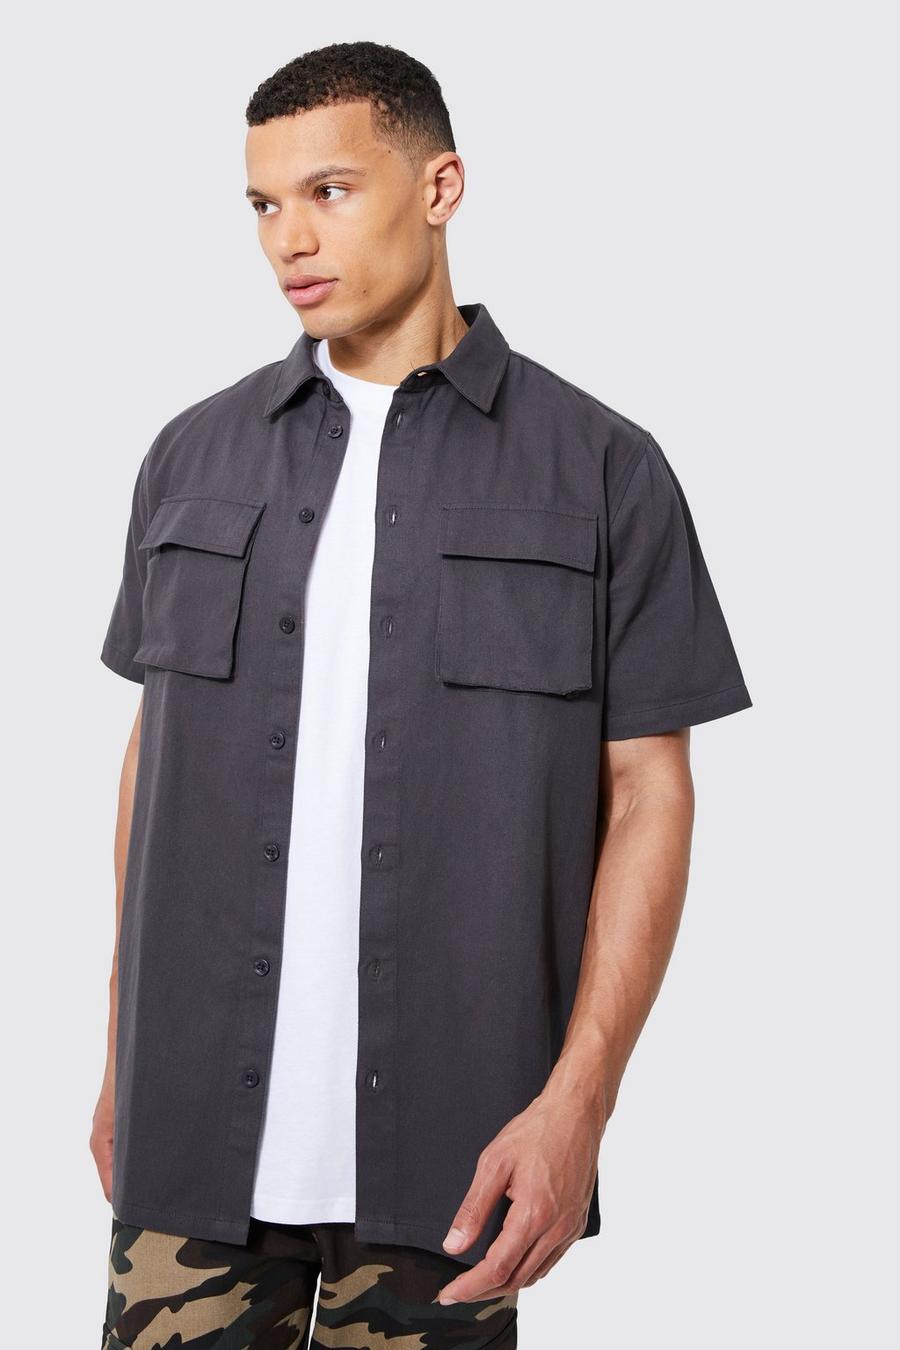 Tall - Chemise utilitaire à manches courtes, Charcoal